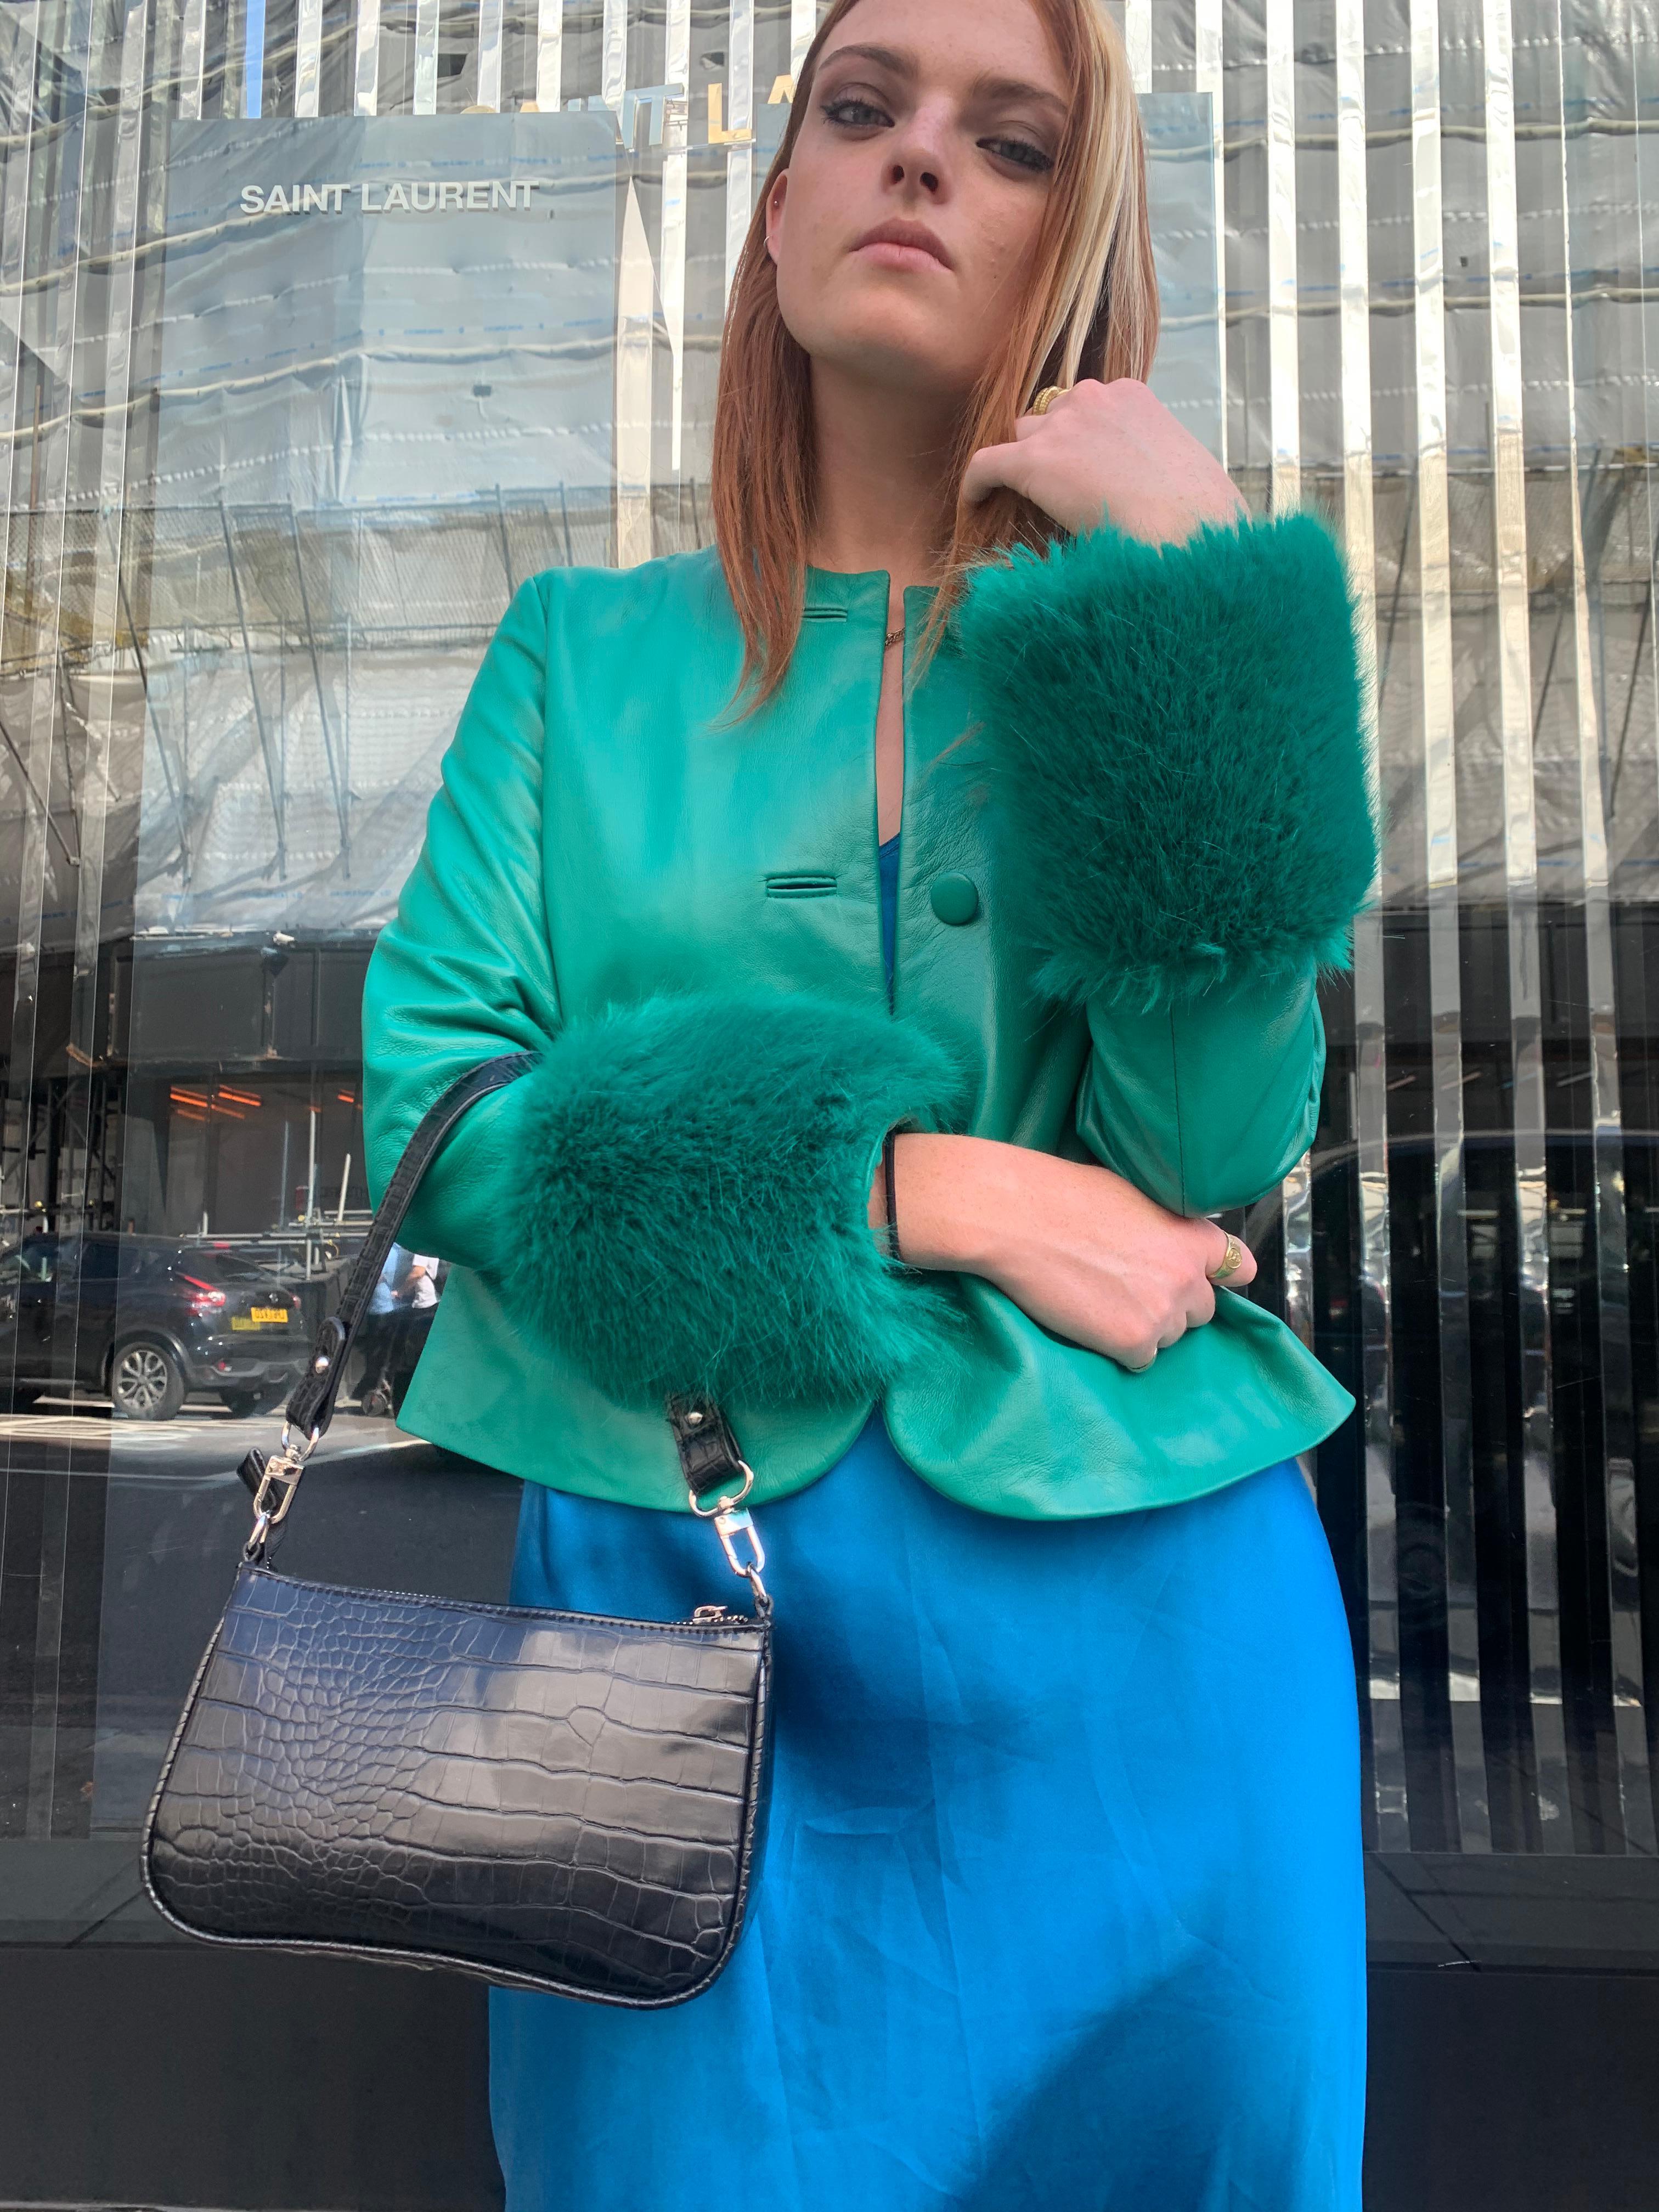 Verheyen Vita Cropped Jacket in Emerald Green Leather with Faux Fur - Size uk 14

Handmade in London, made with 100% Italian Lambs Leather and the highest quality of faux fur to match, this luxury item is an investment piece to wear for a lifetime. 